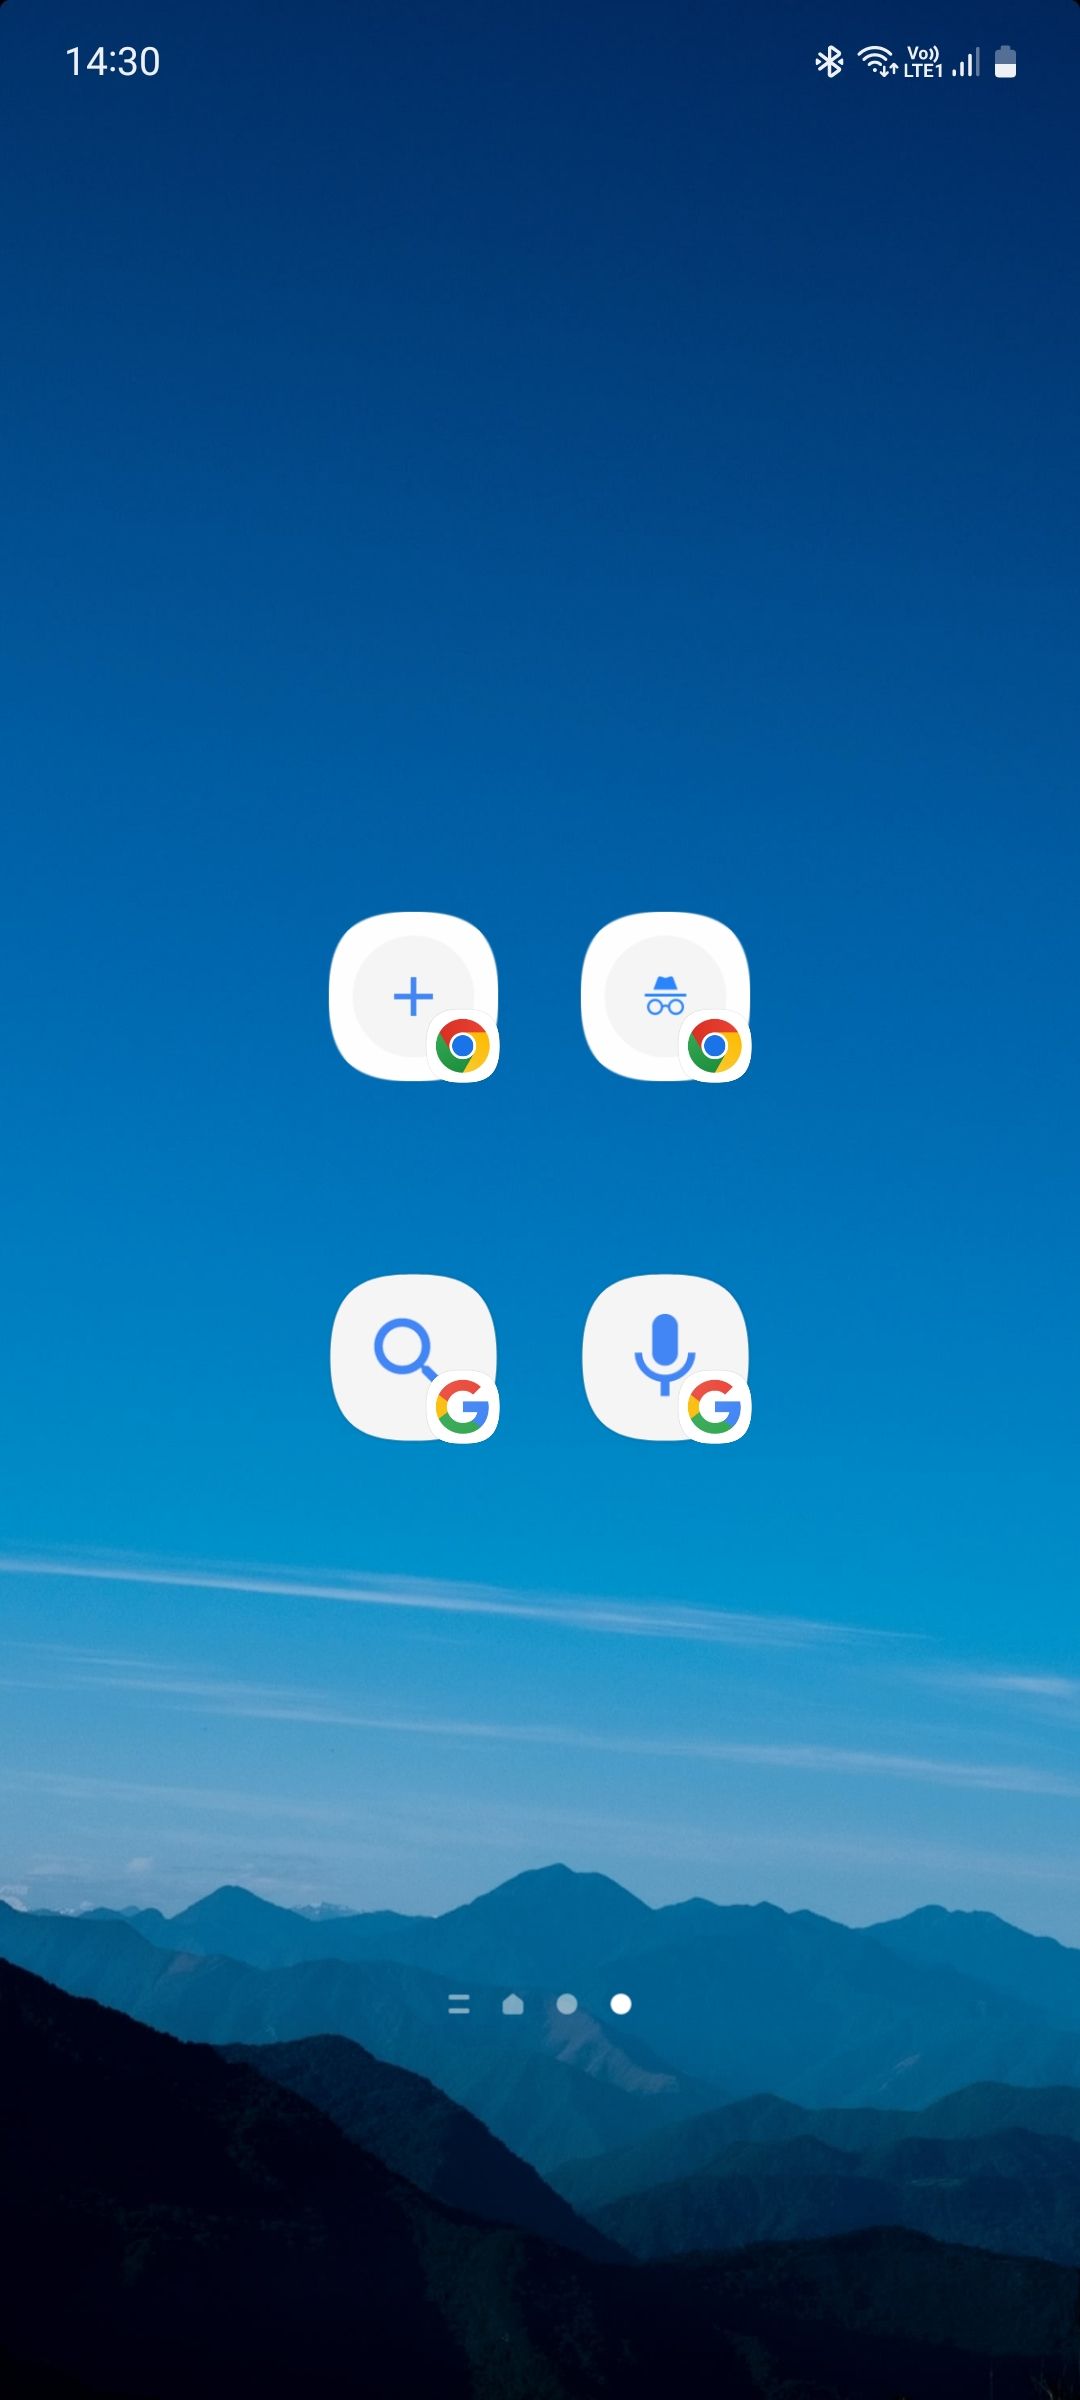 Google app and Chrome shortcuts on Android Home screen